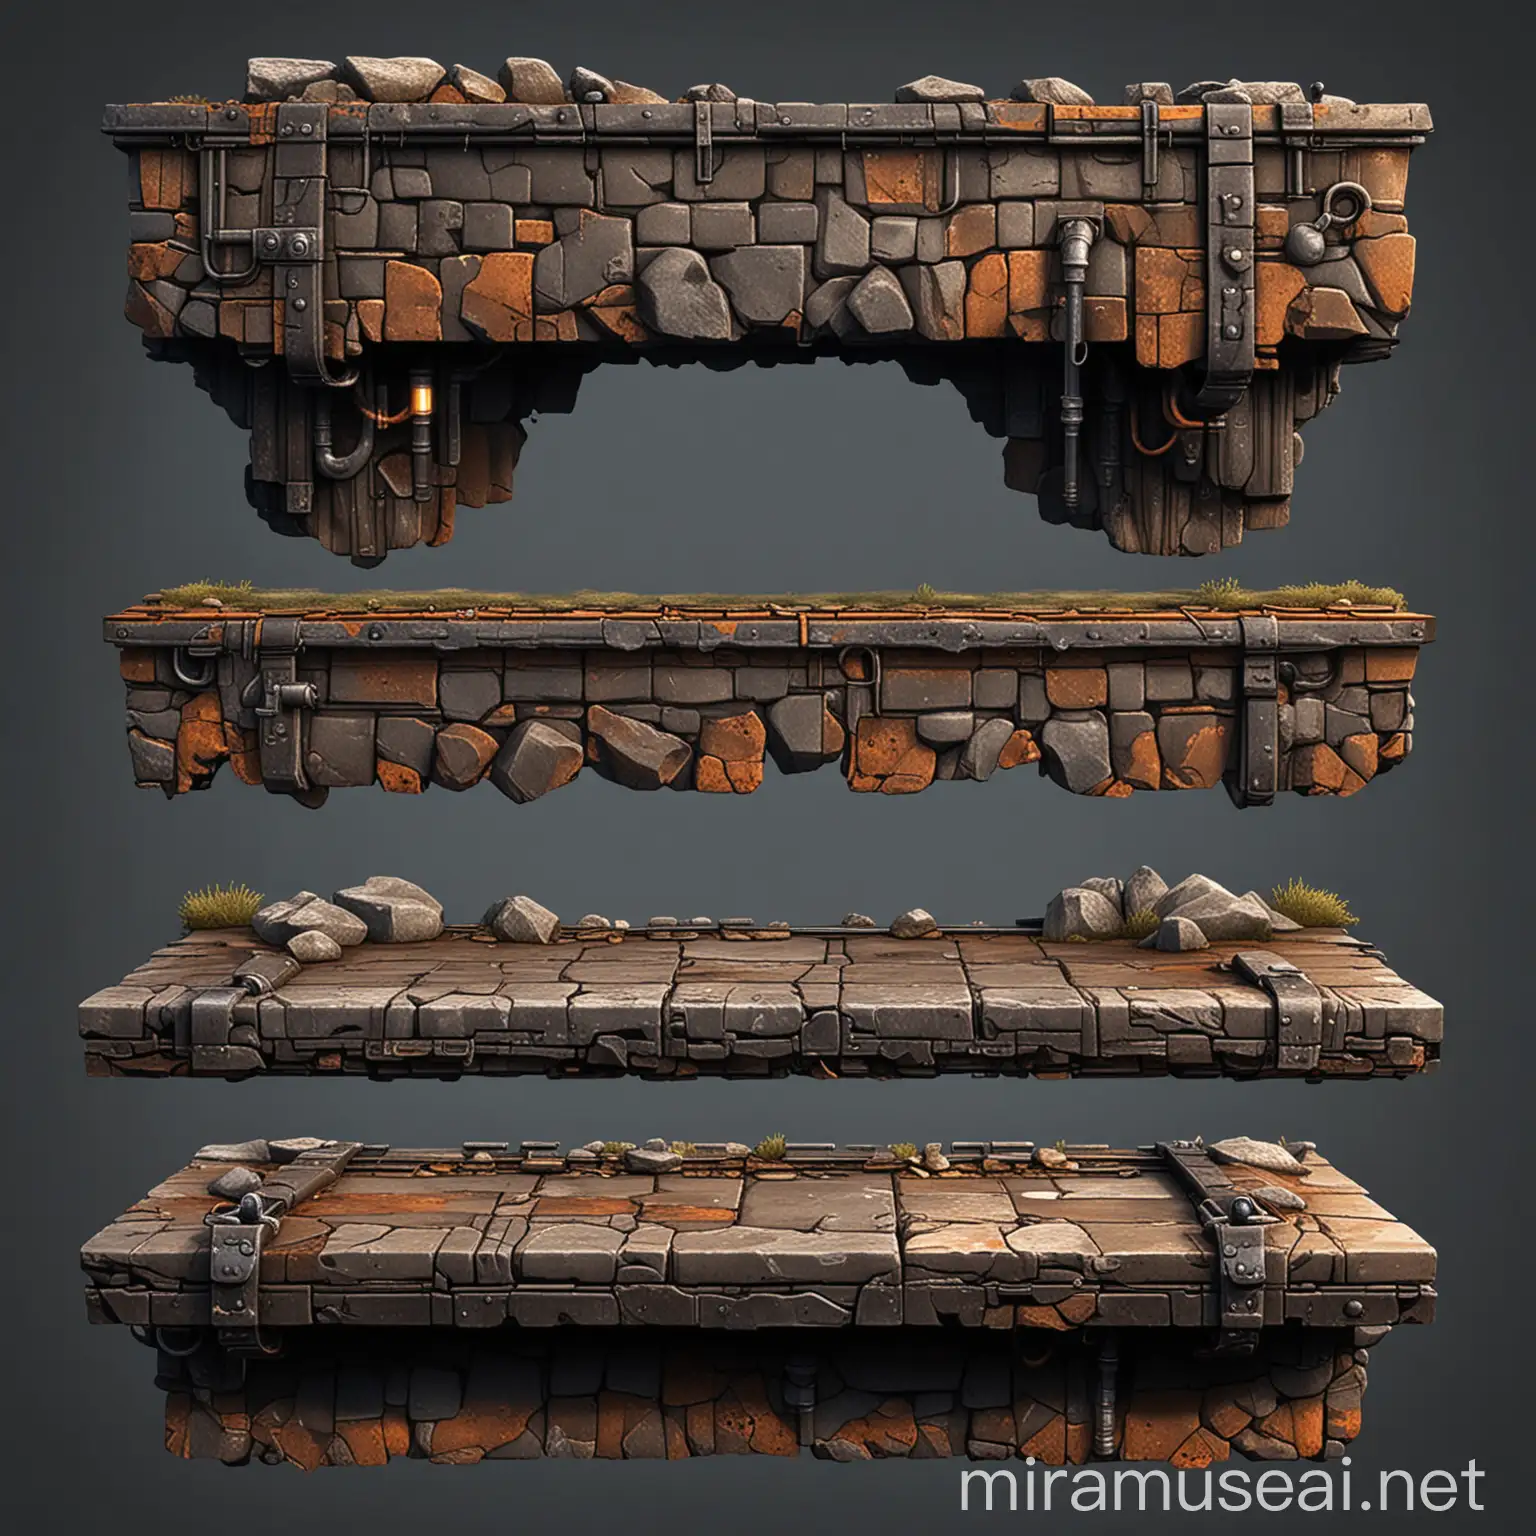 Weathered Stone and Rusted Metal Underground Platform for SideScrolling Game